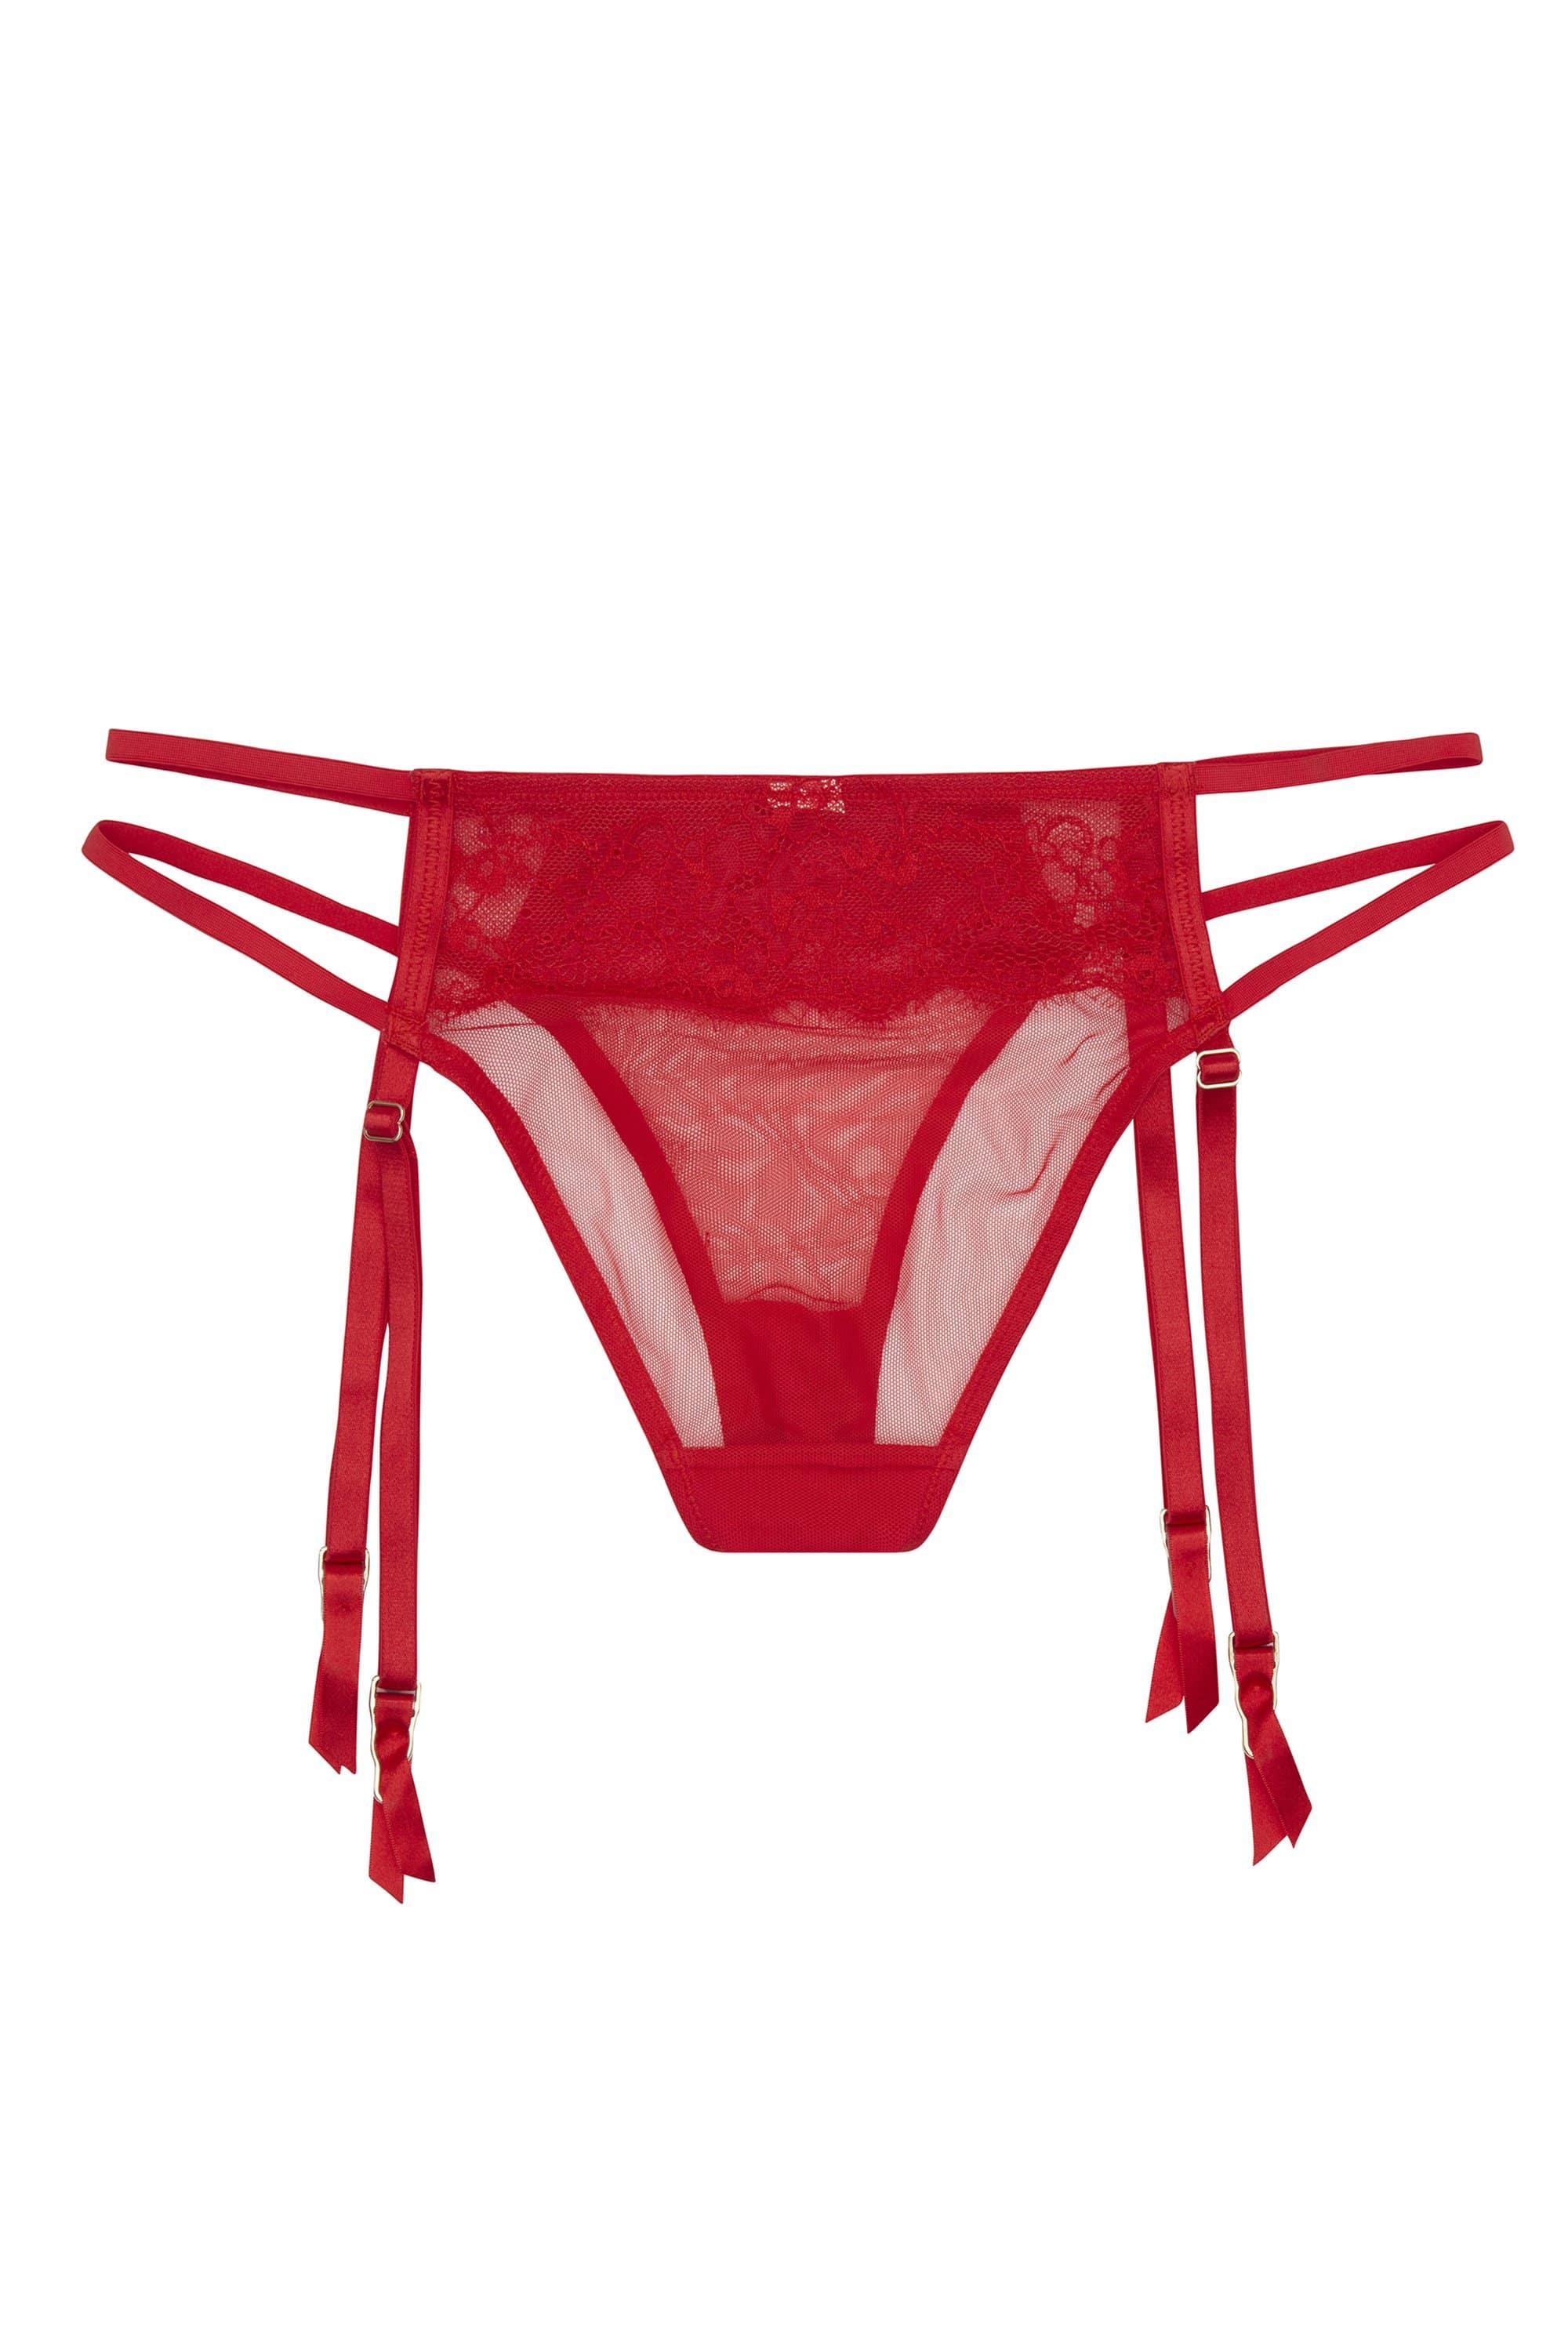 New spell FP cherry Poinciana bloomers panty red XS underwear